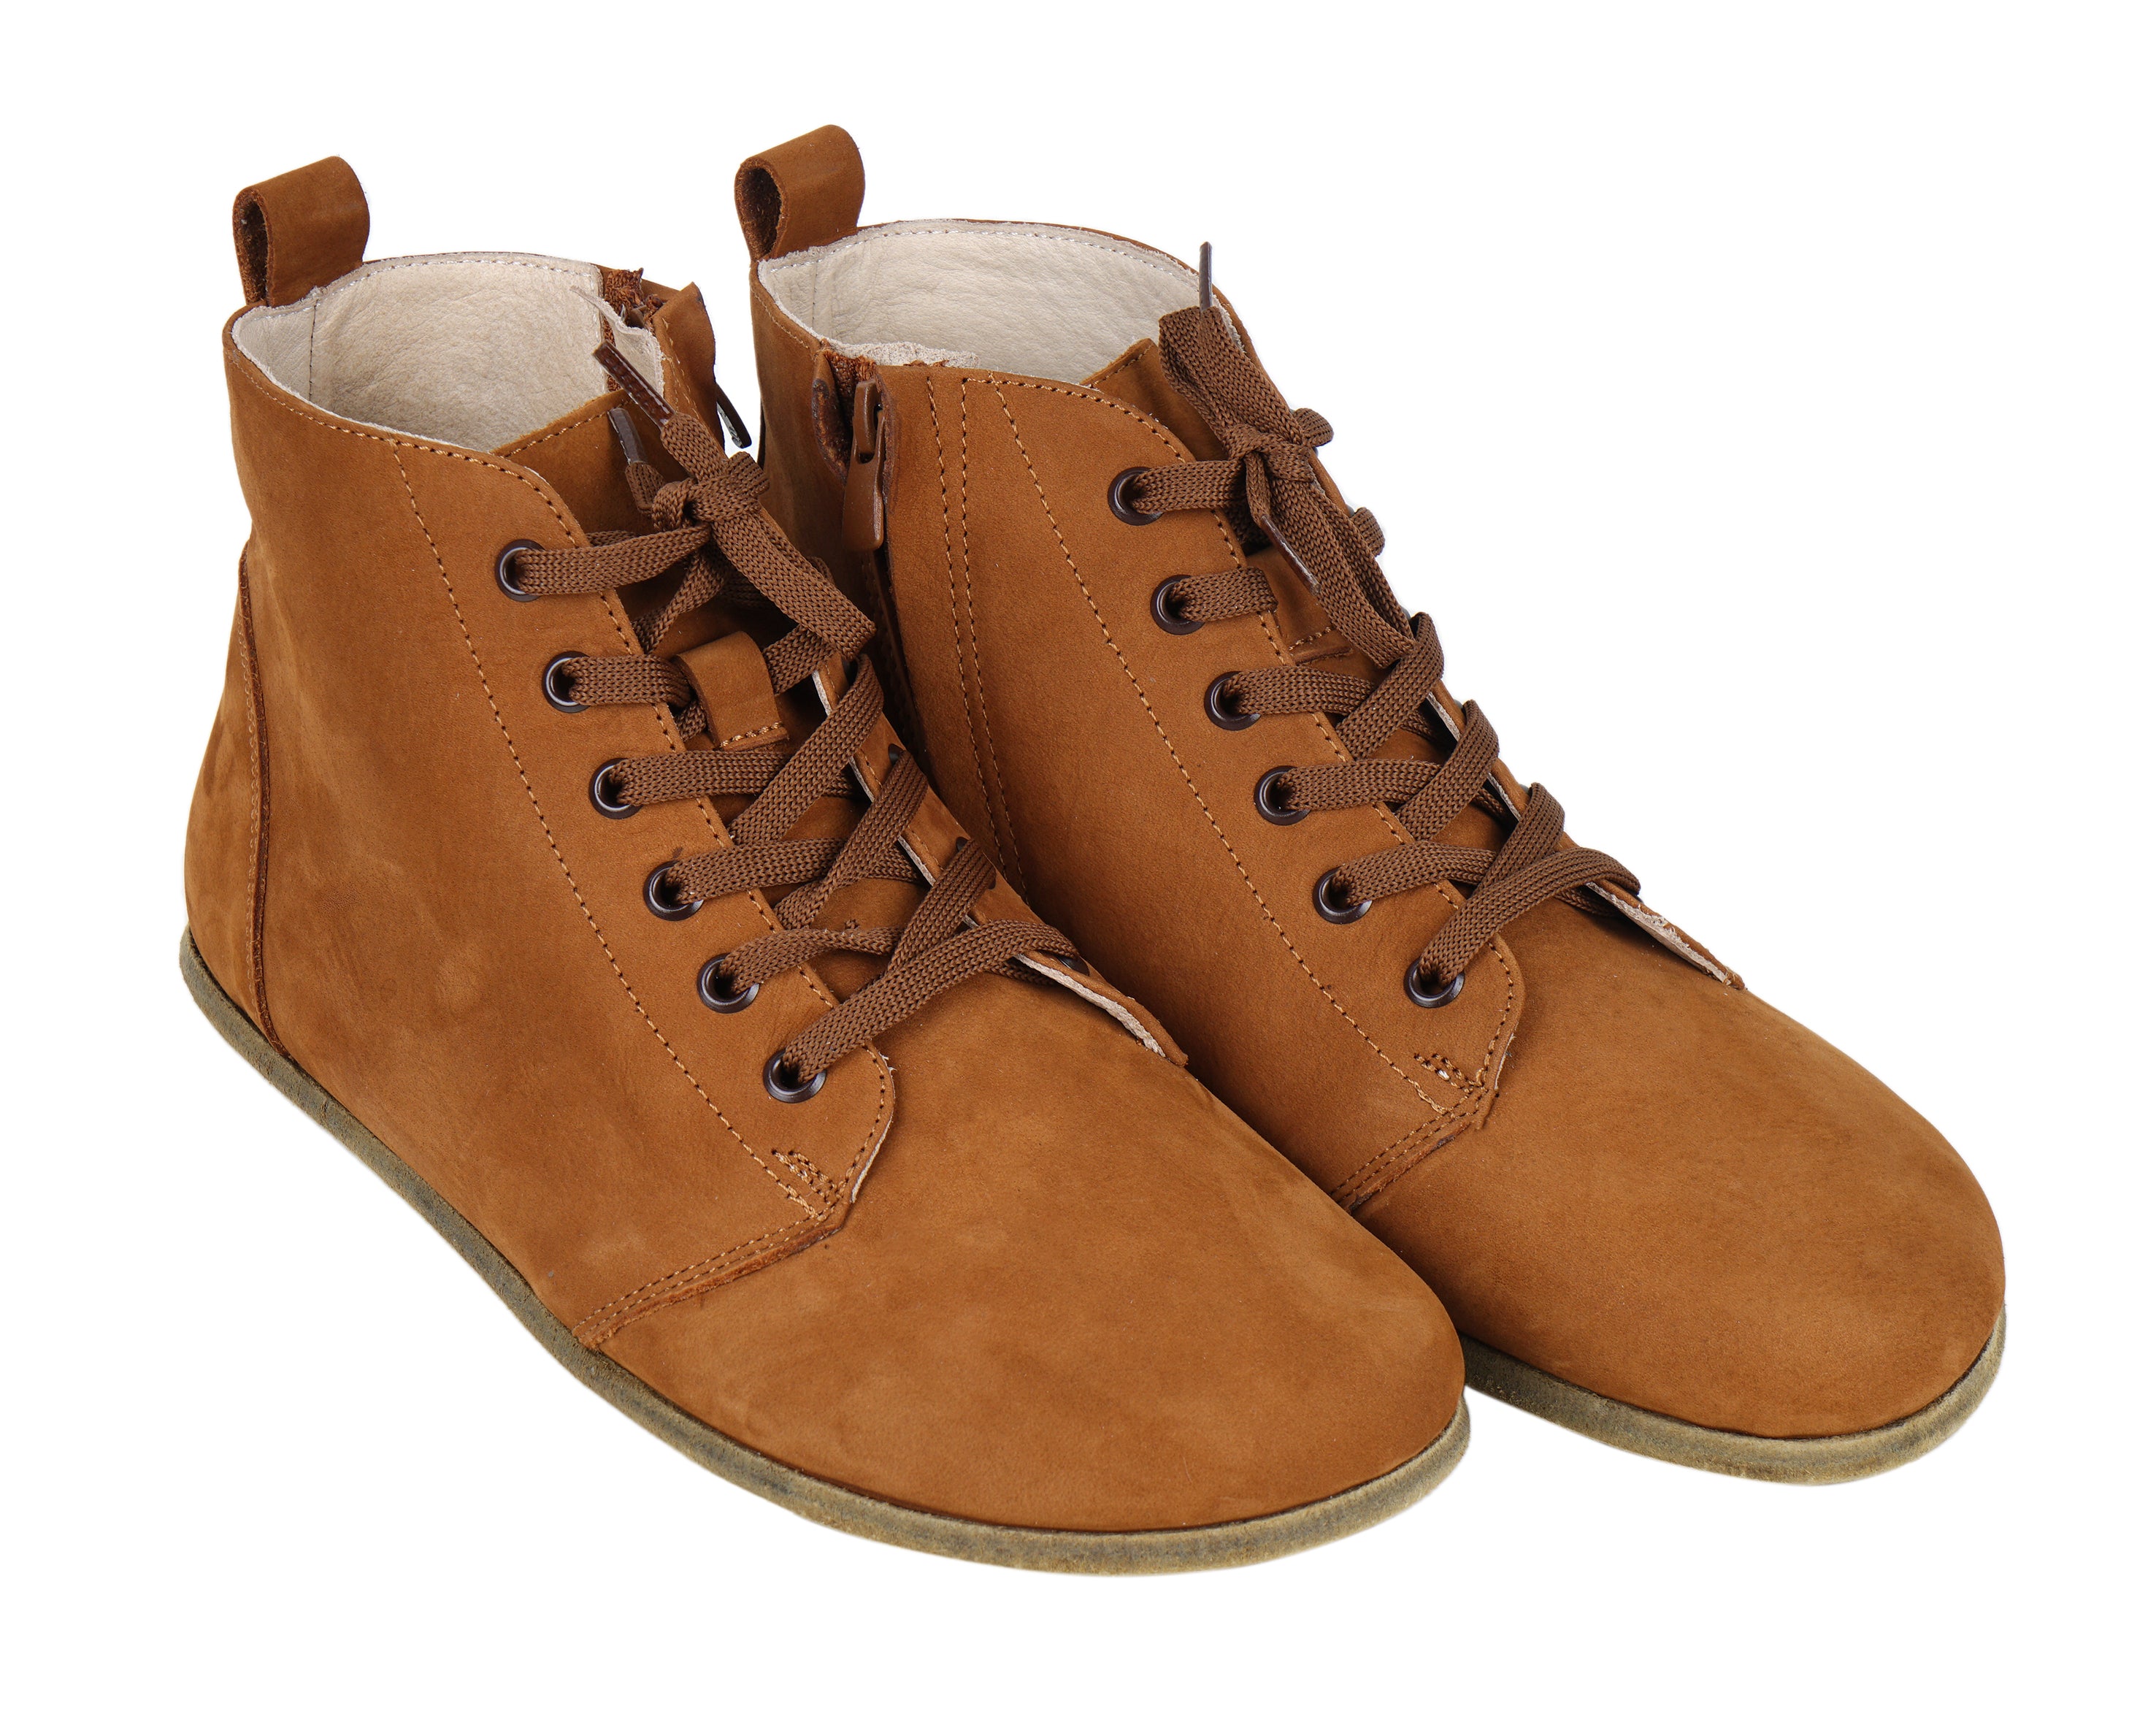 Tan Short Boots Wide Barefoot Nubuck Leather Handmade Shoes